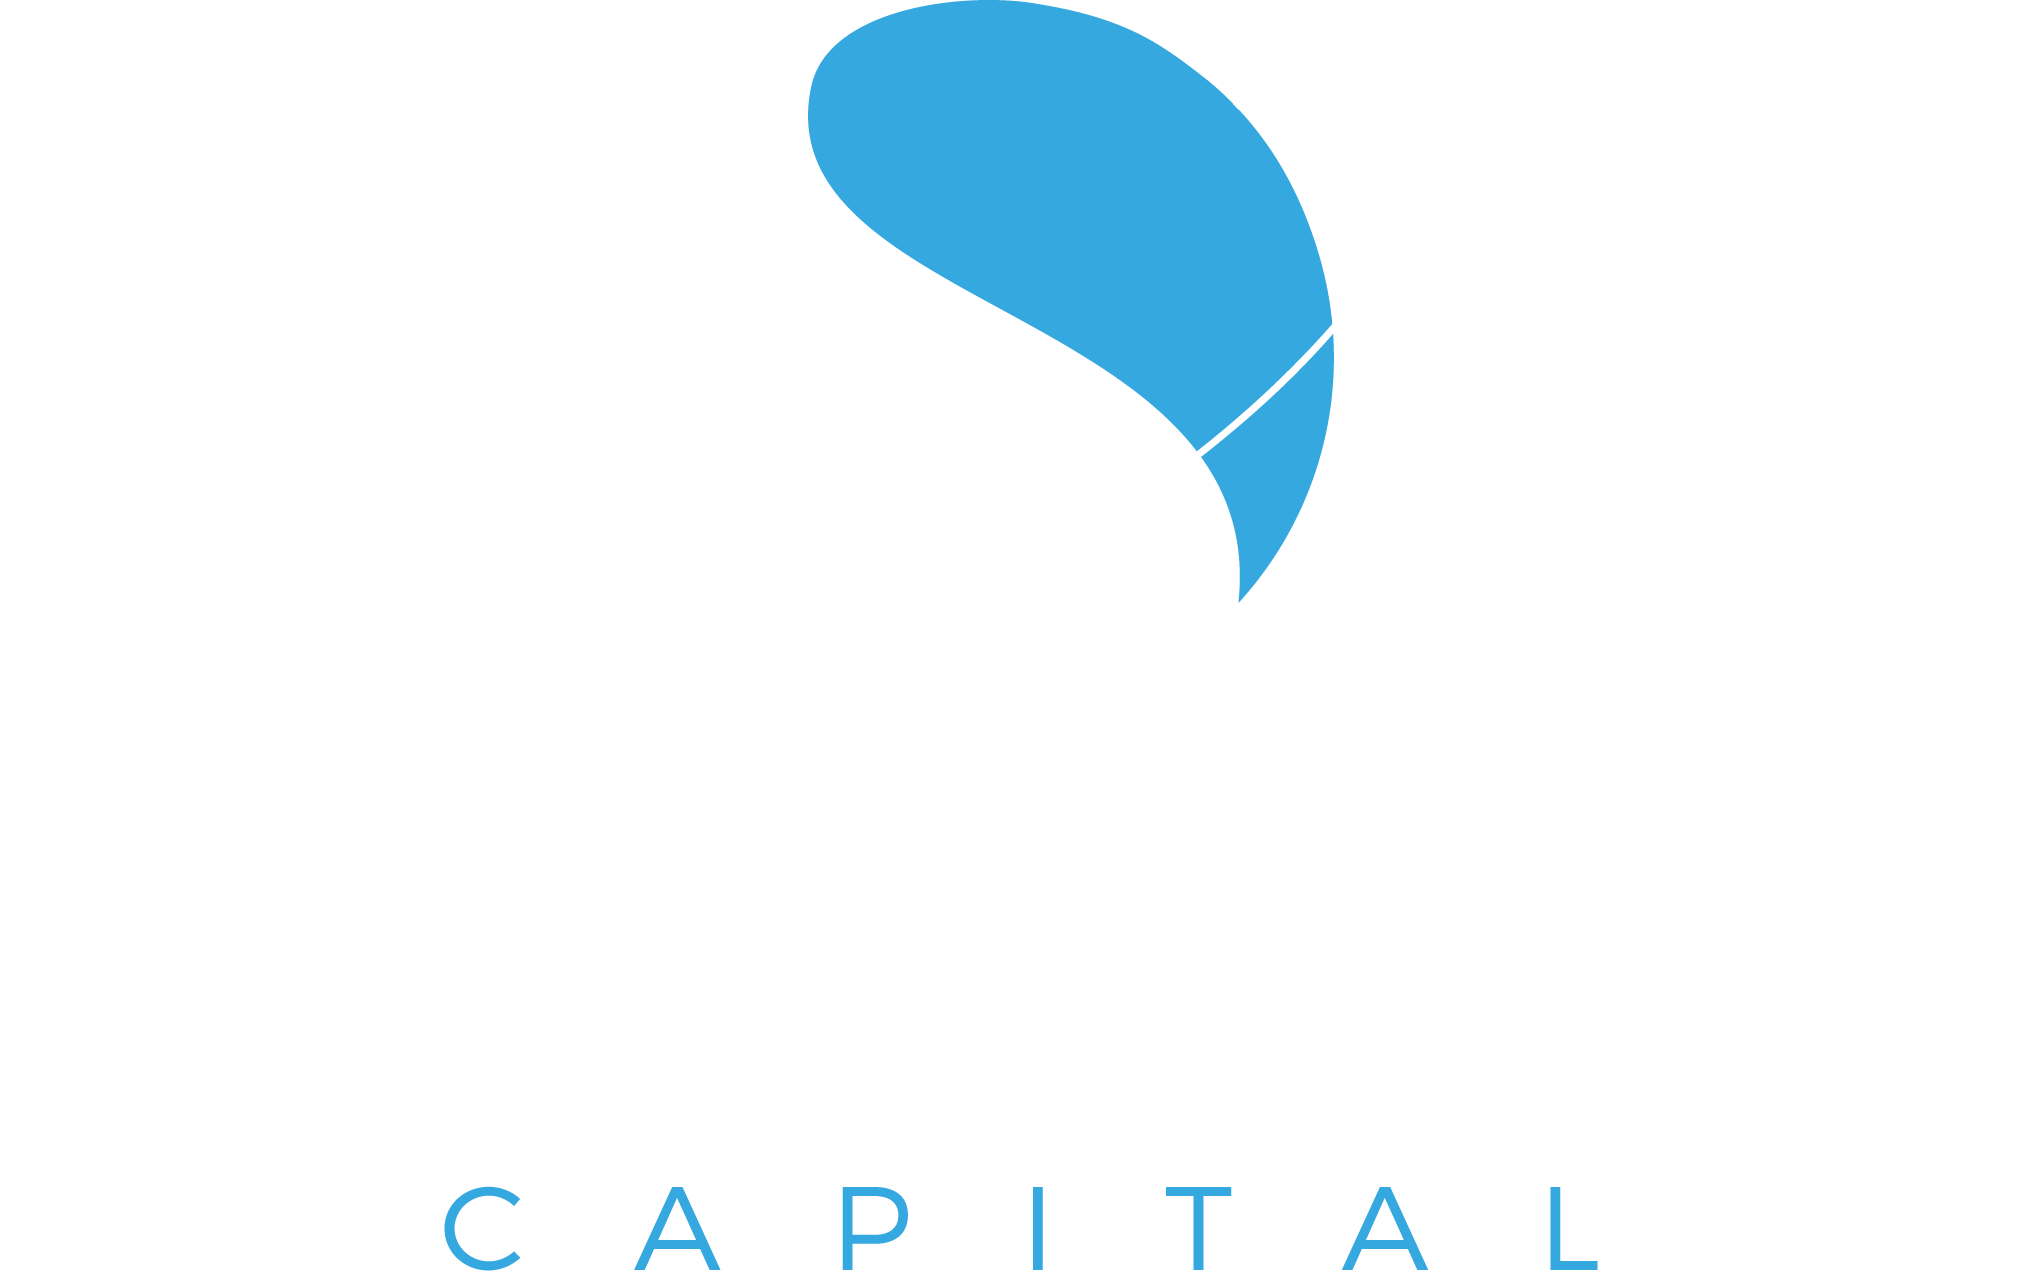 Space.com Logo - Seraphim Capital. the world's first venture fund dedicated to